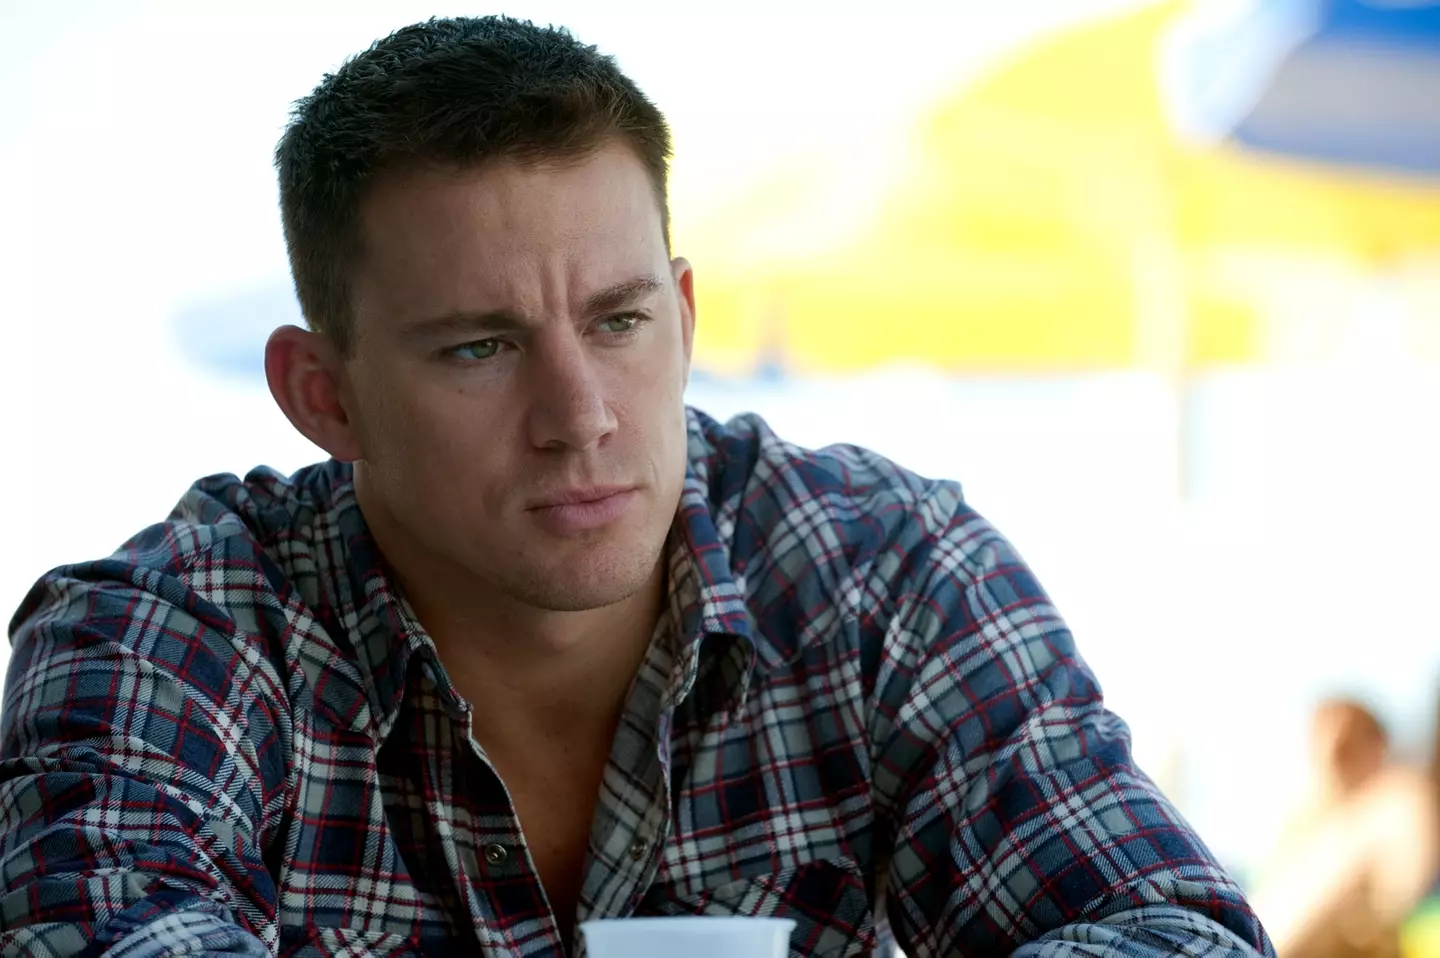 Channing has starred in all the movies (